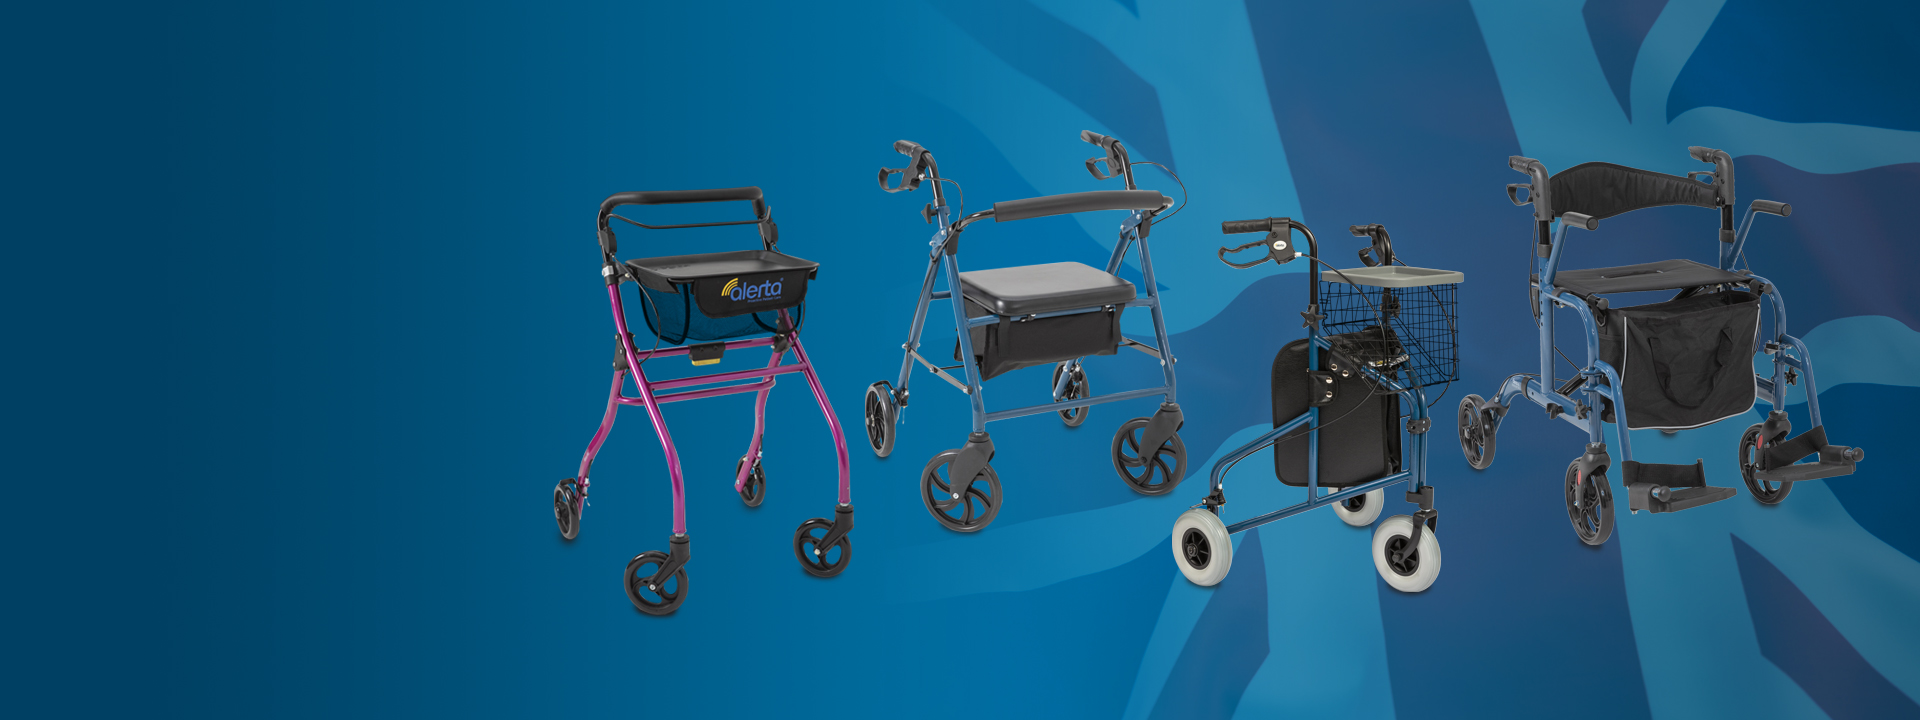 NEW Additions to Walking Aids Range